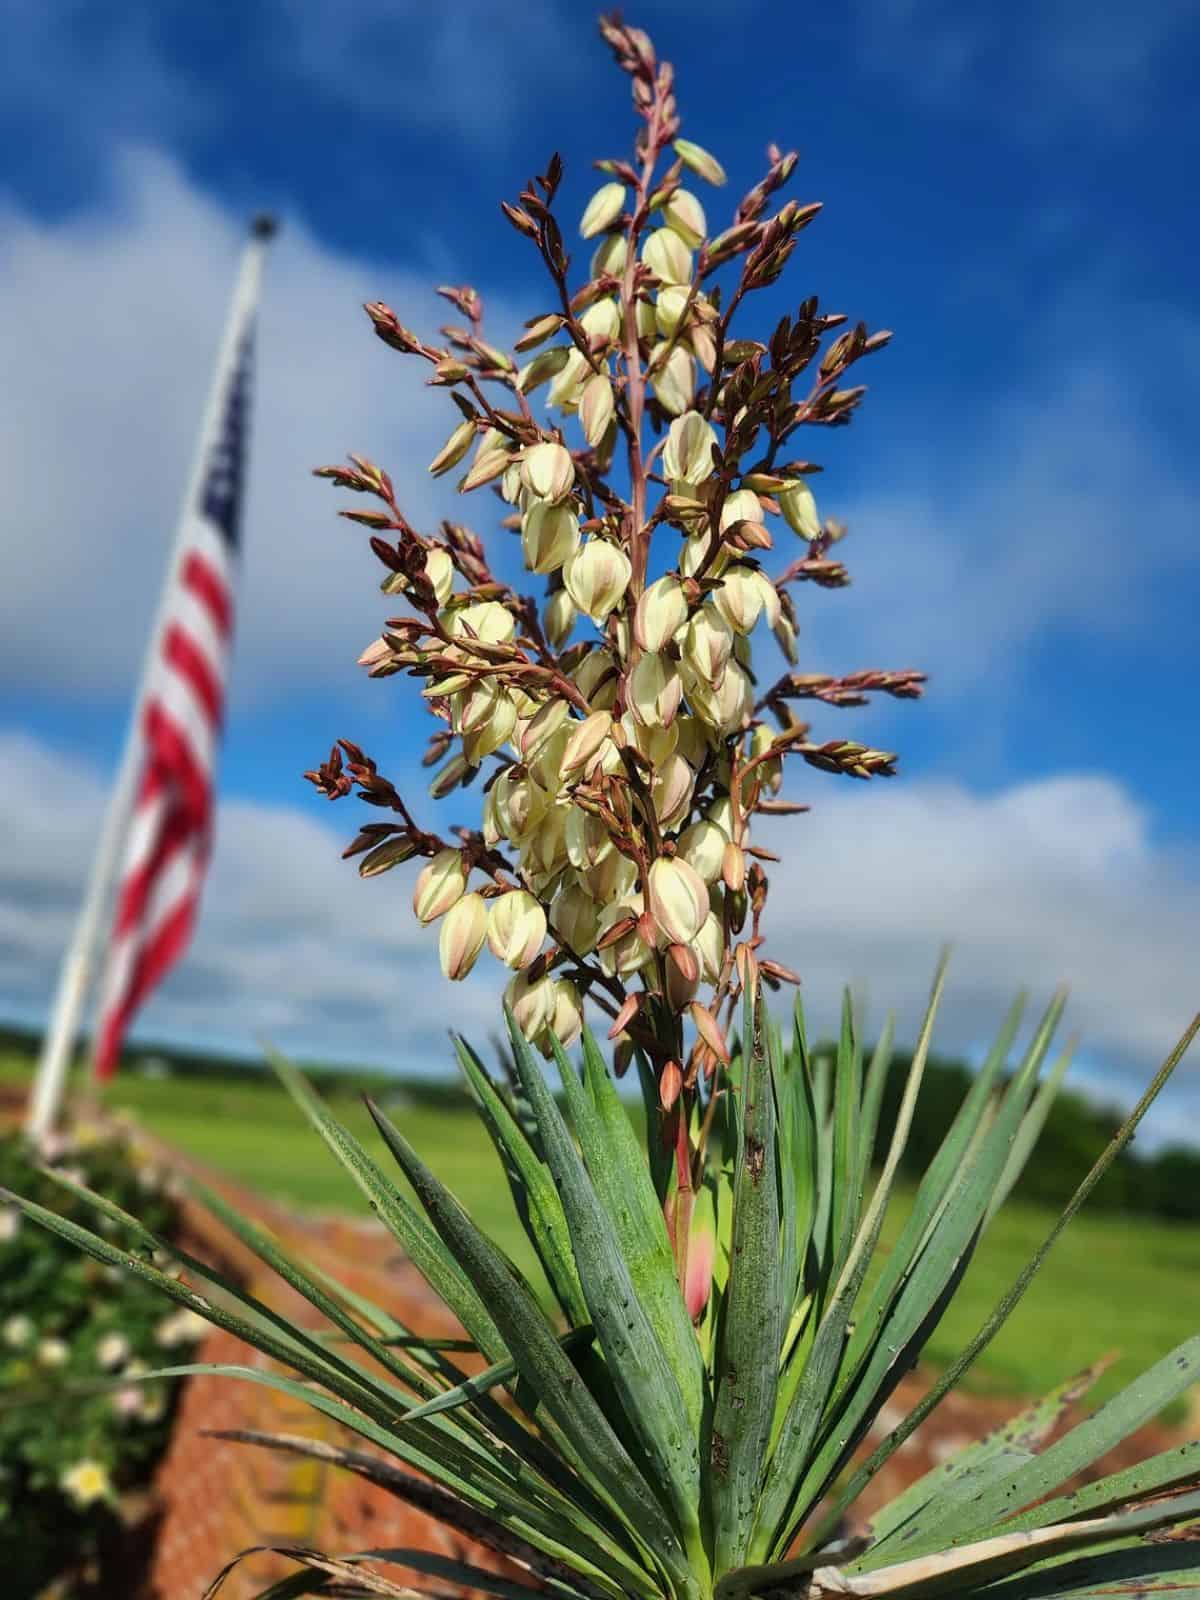 Yucca Filamentosa in white bloom grows outdoor.